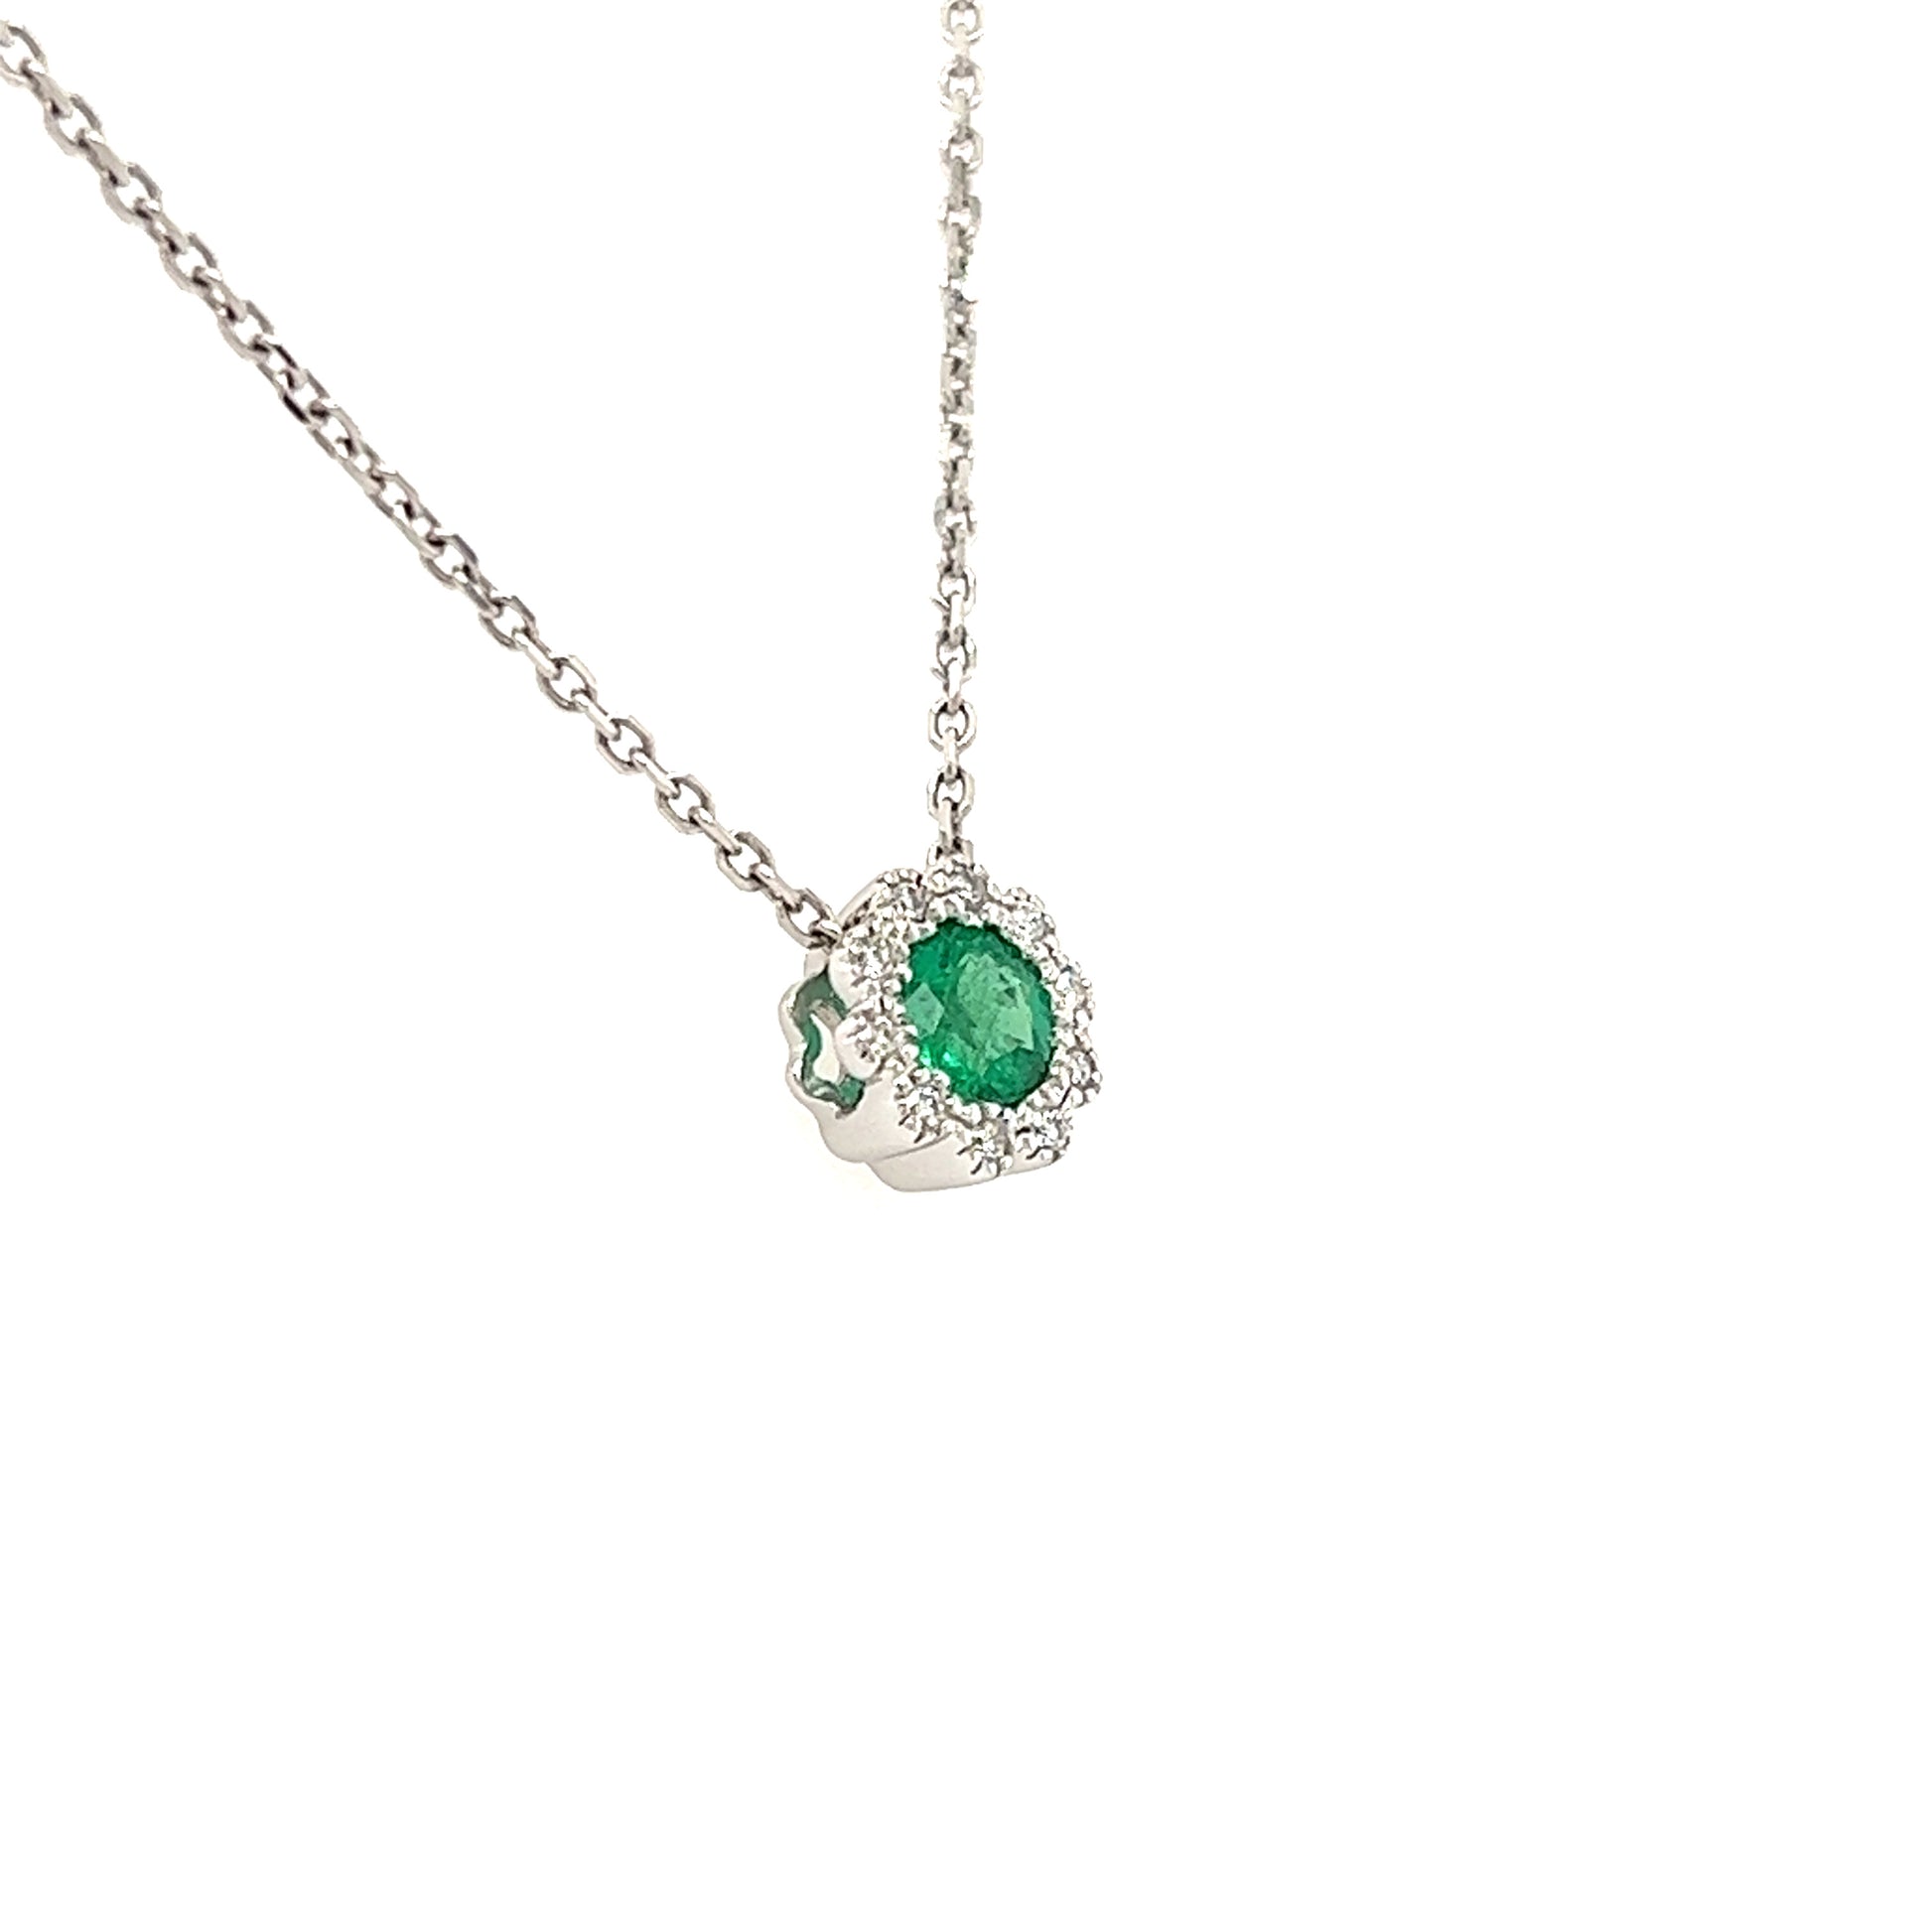 Floral Emerald Pendant with Diamond Halo in 14K White Gold Pendant and Chain Right Side